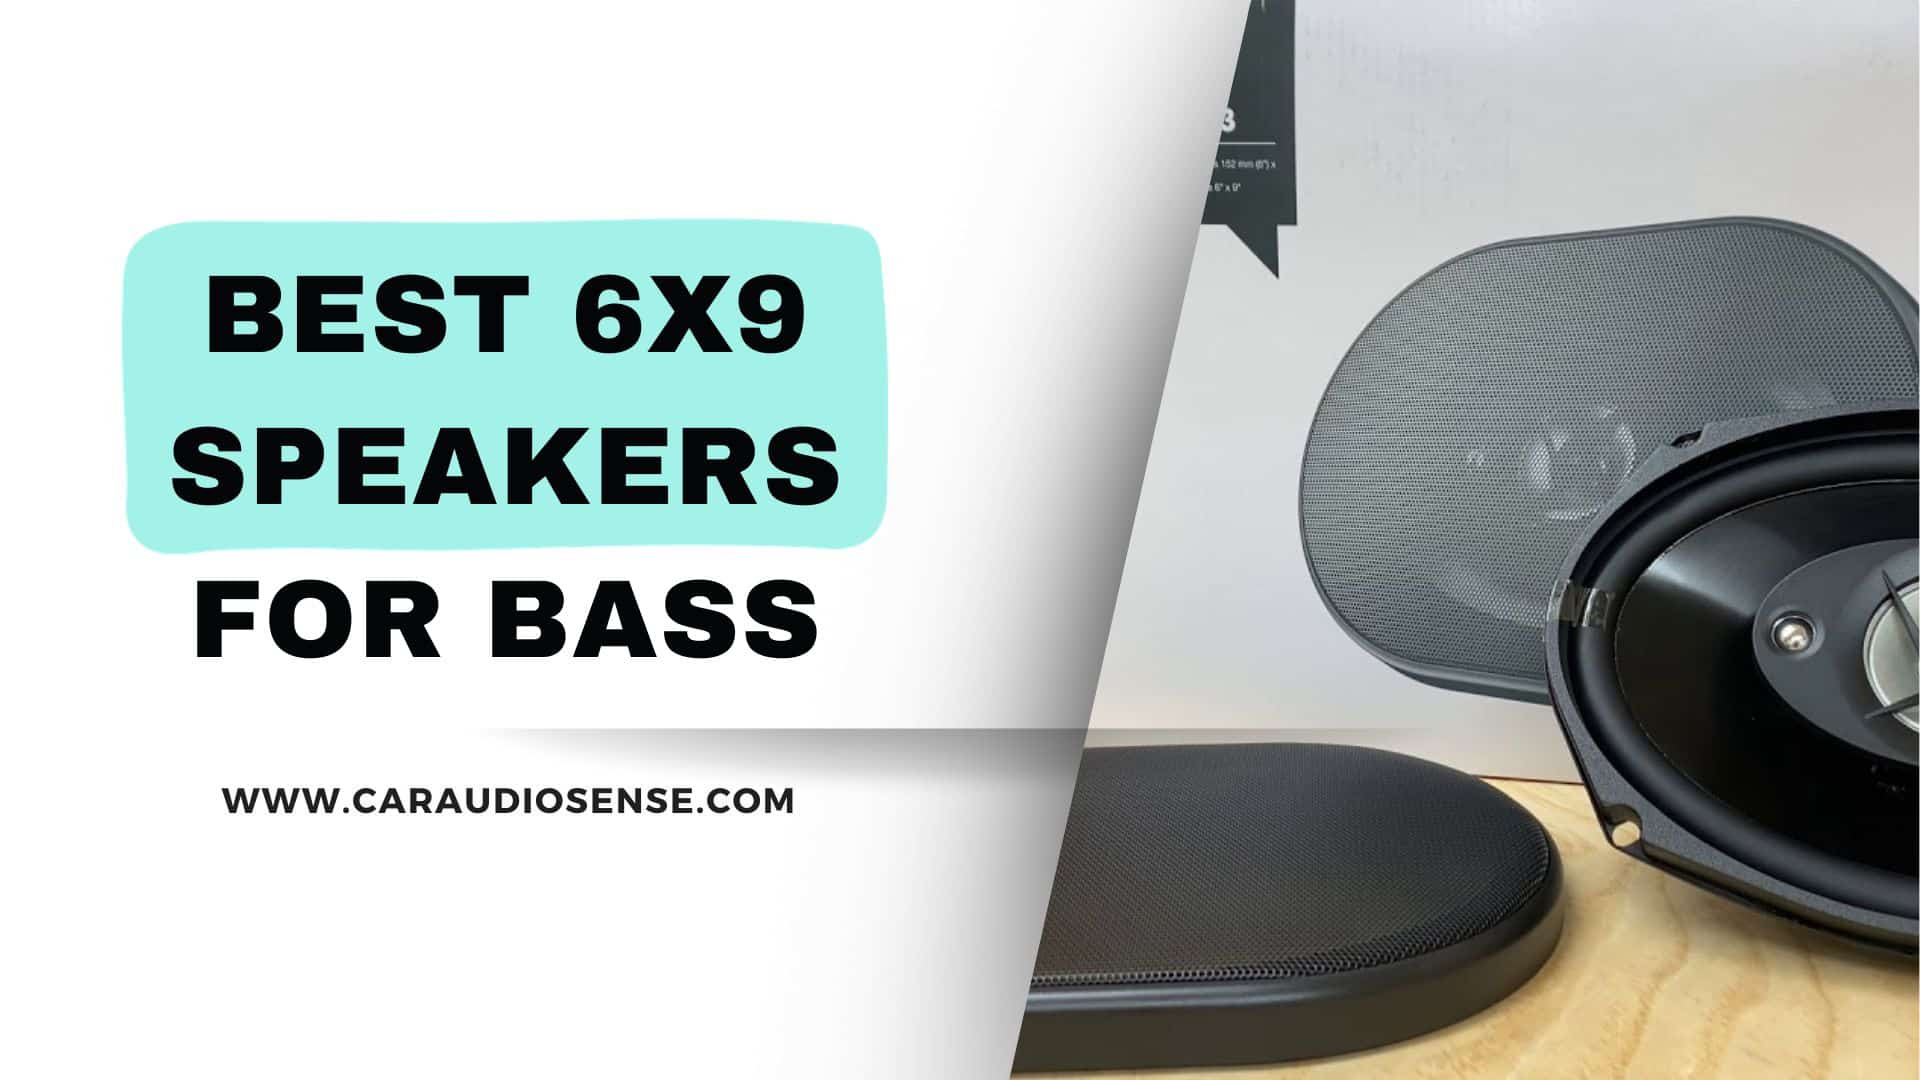 Best 6x9 Speakers for Bass